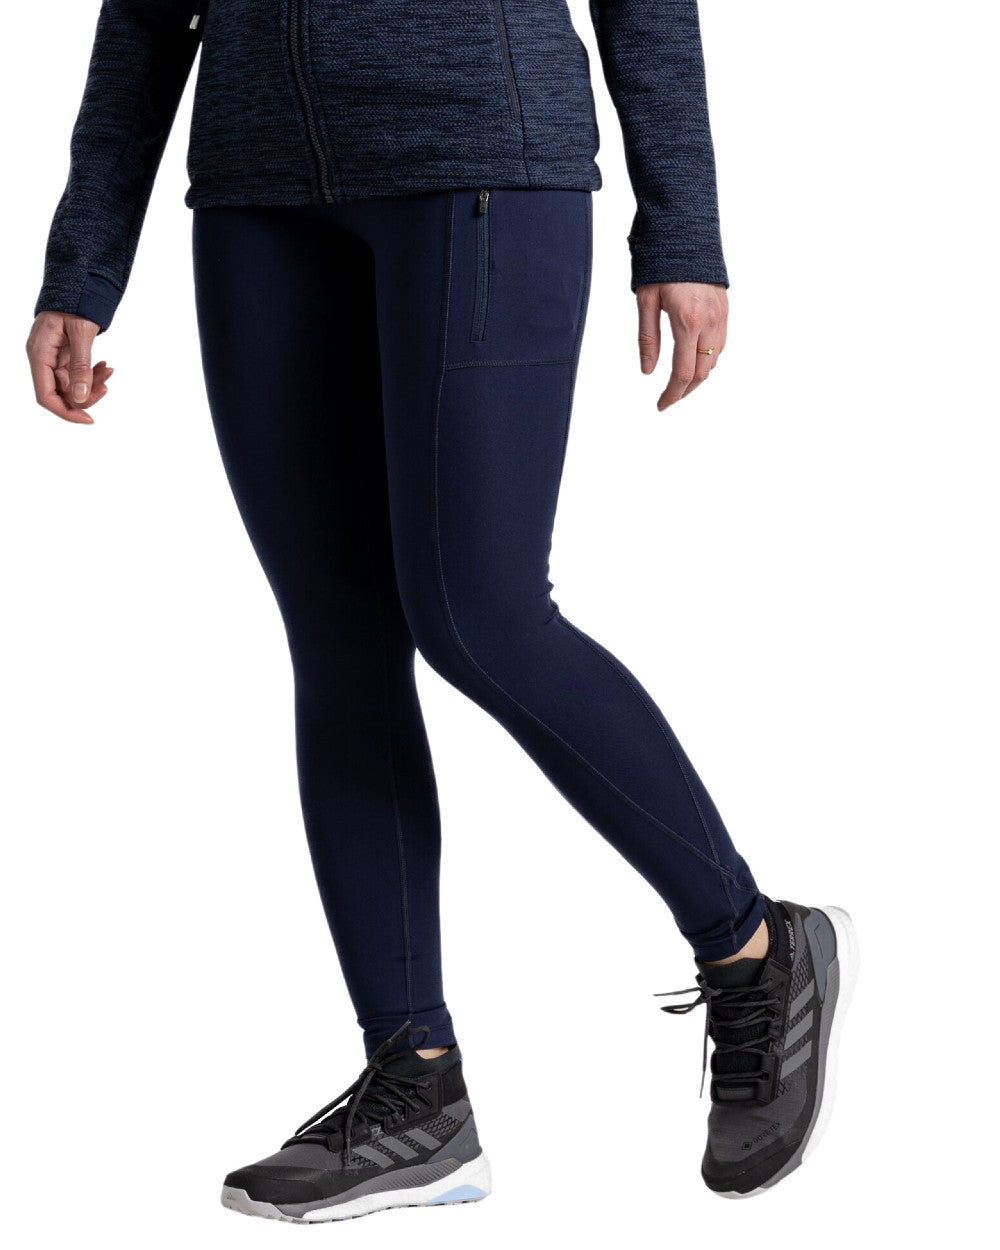 Blue Navy Coloured Craghoppers Womens Kiwi Pro Leggings On A White Background 